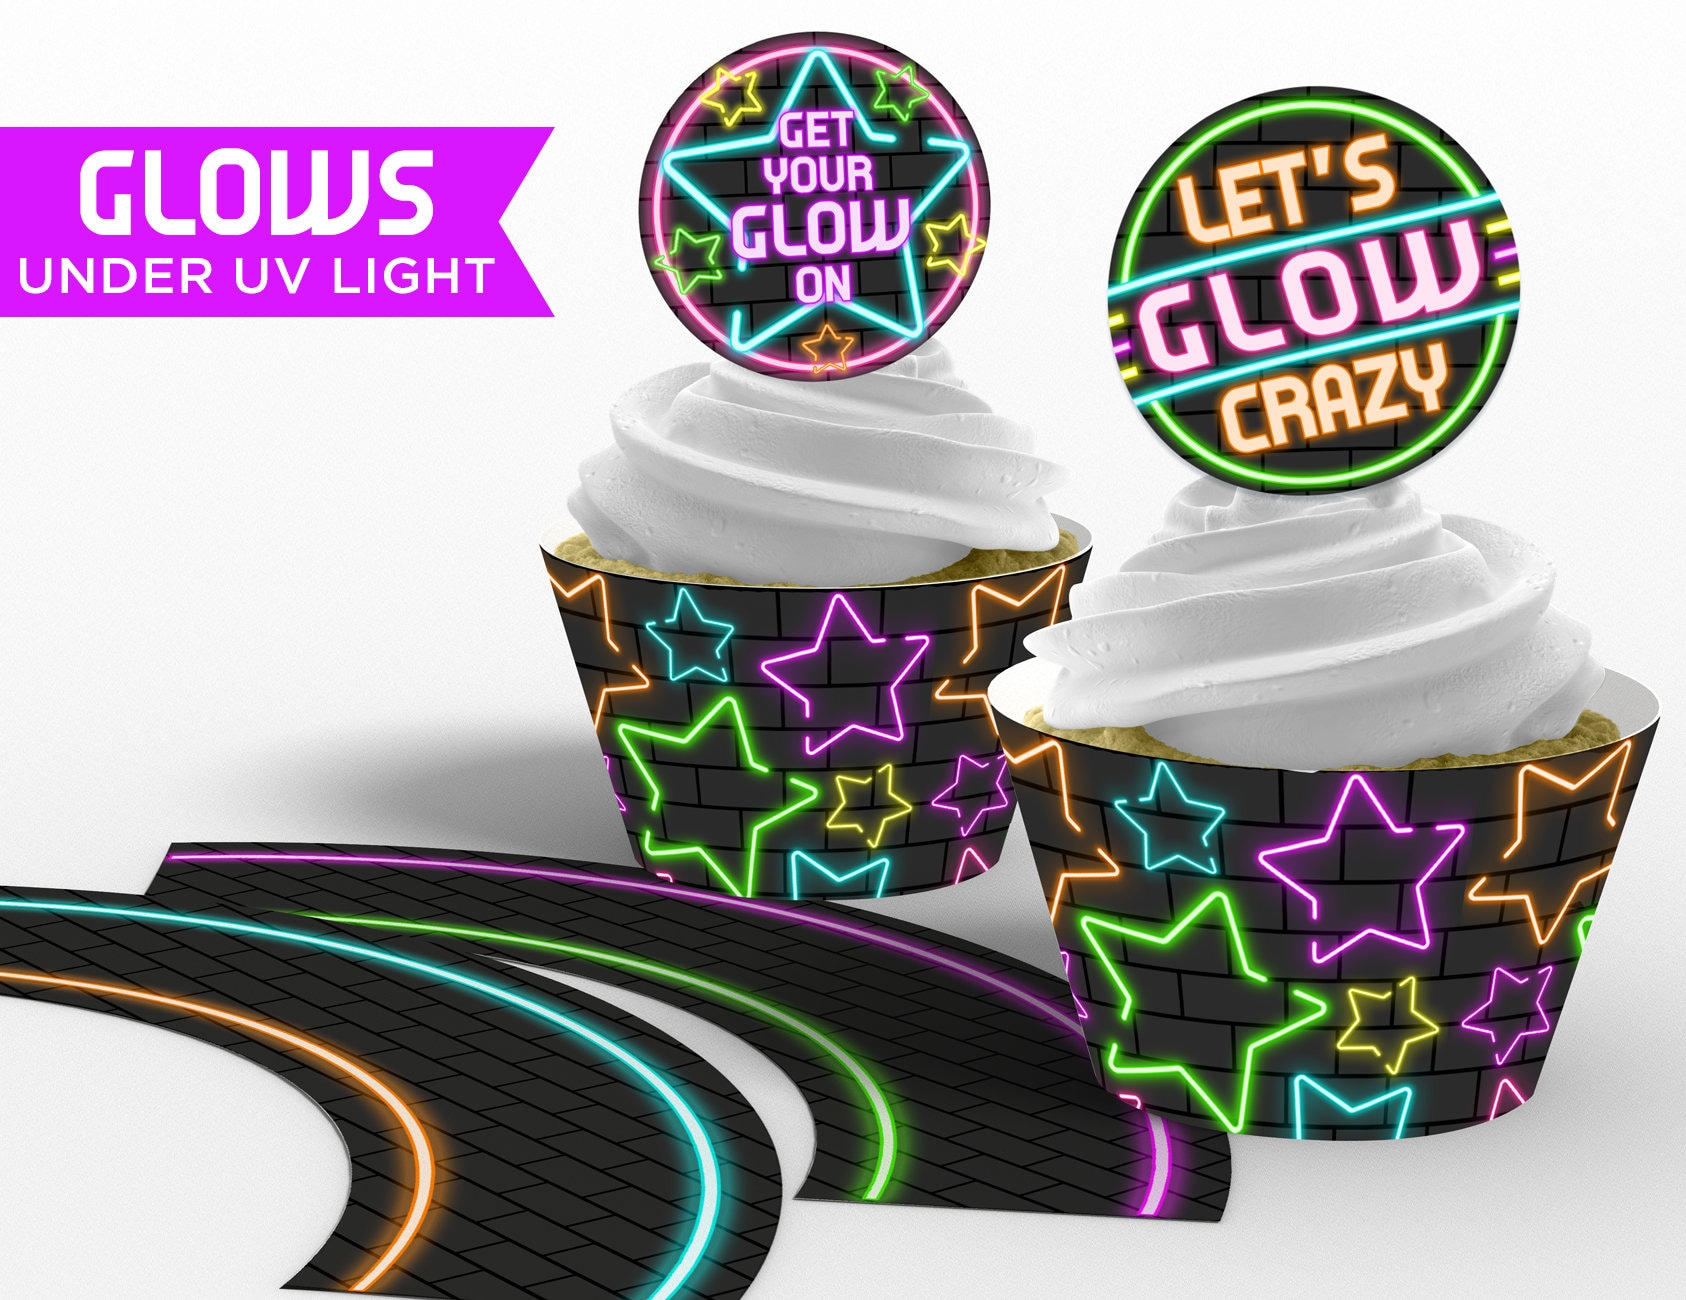 Neon Glow Party Invitation Girls - Cupcakemakeover